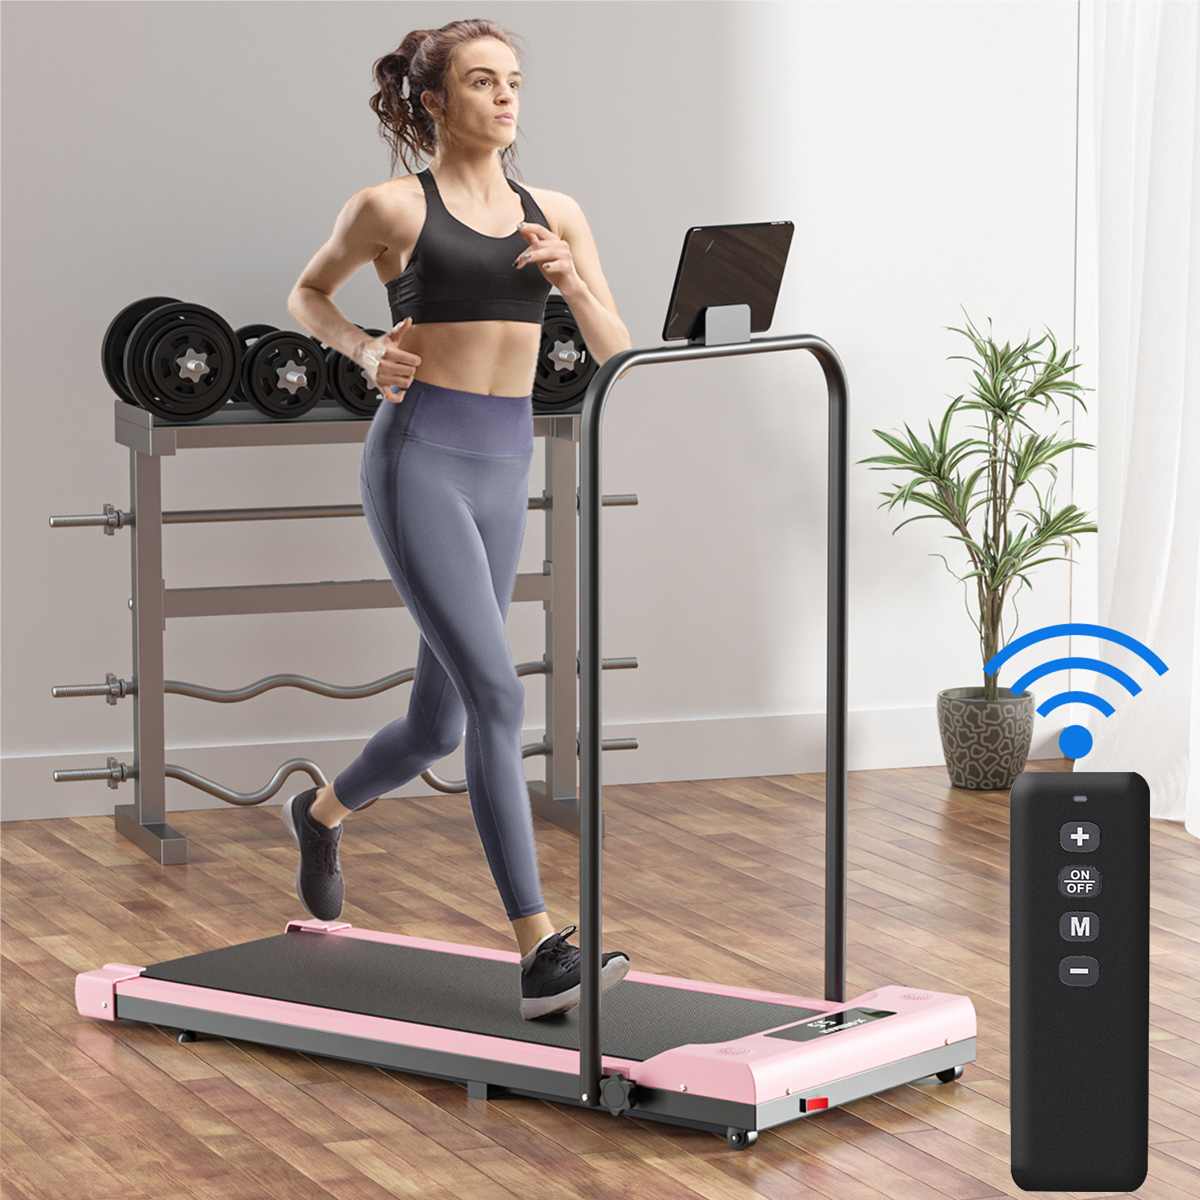 2-in-1 Tapis de course pliable multifonctionnel Mini Fitness Indoor Exercise Equipment Gym Folding House Fitness Treadmills US Plug